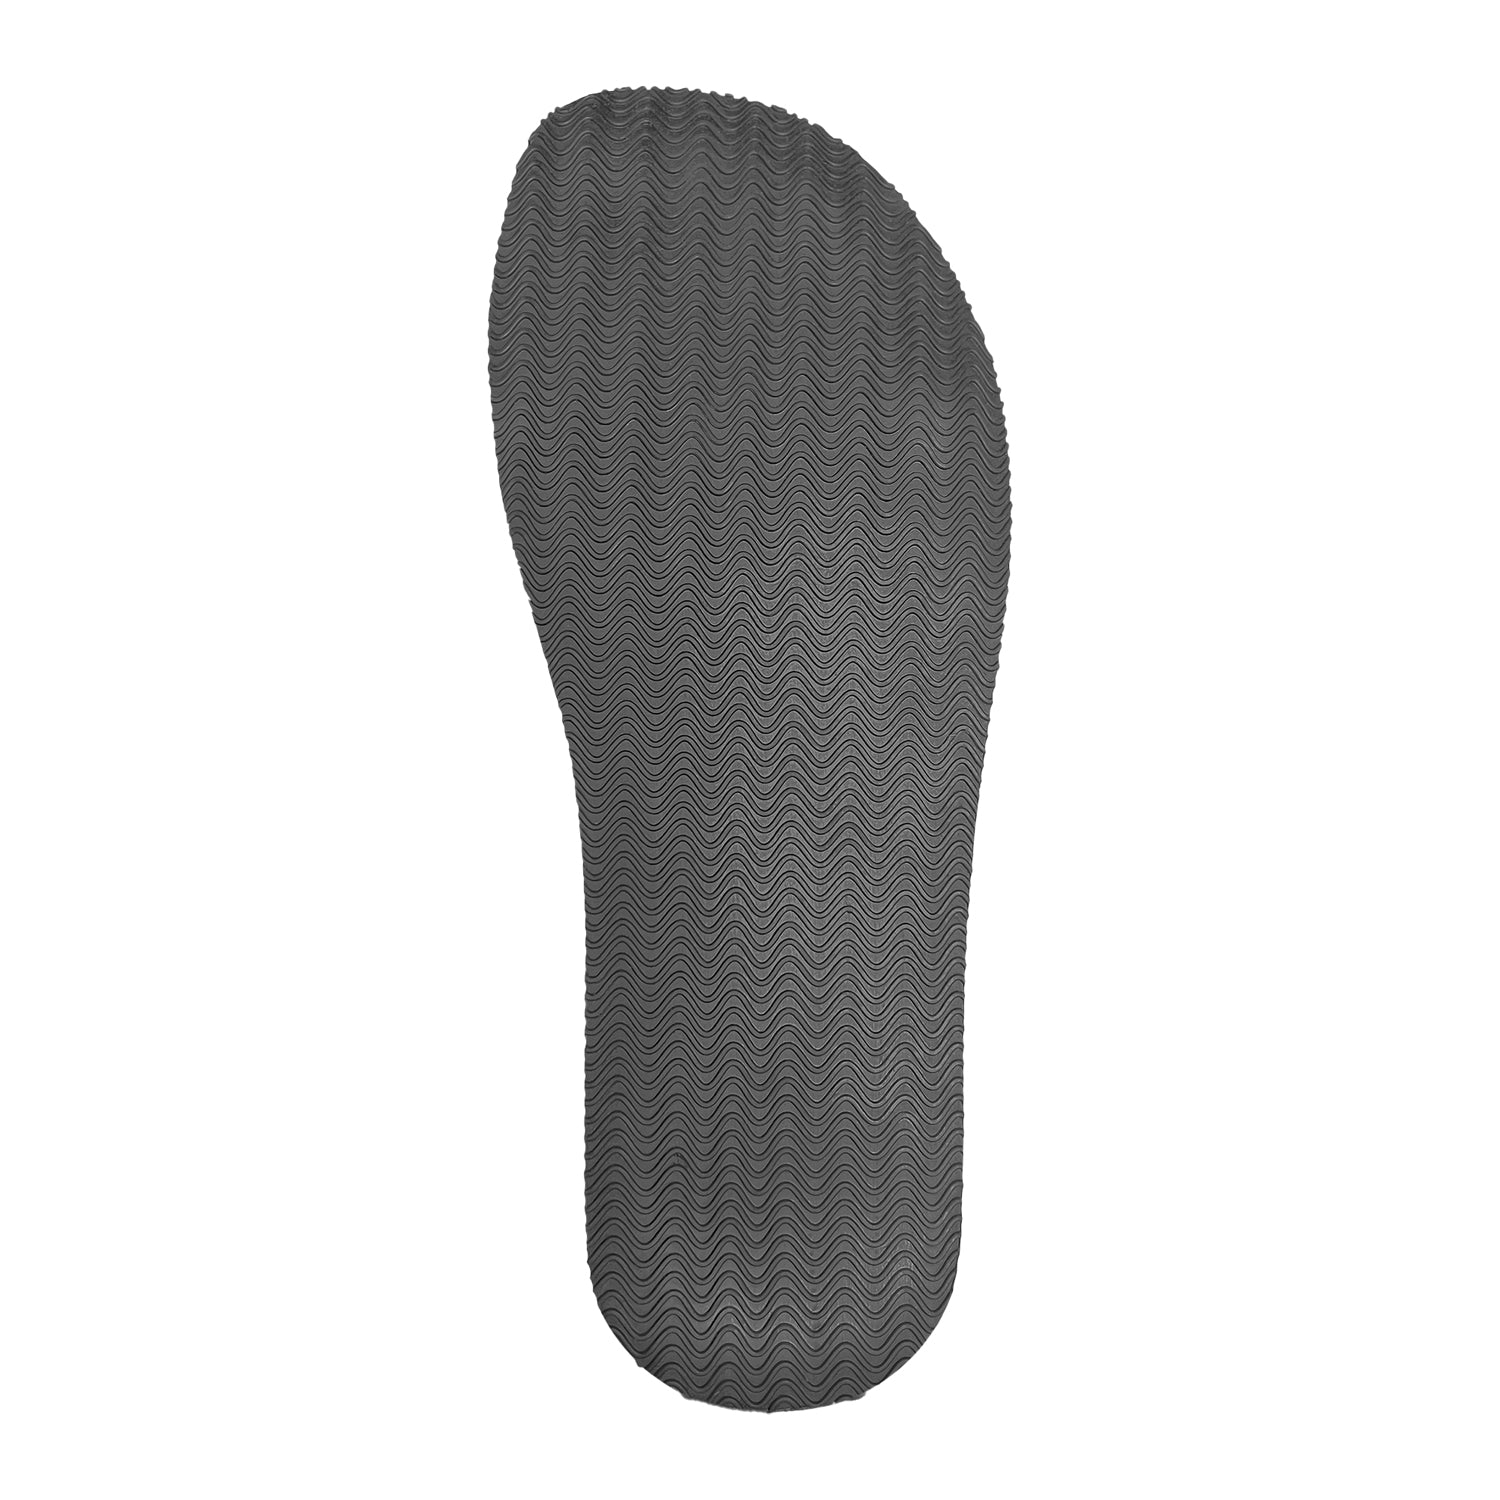 The image displays a gray shoe sole with a detailed herringbone tread pattern, viewed from directly above; it's part of versatile Bearfoot training sneakers featuring the Ursus Suede Low-Top Black design.